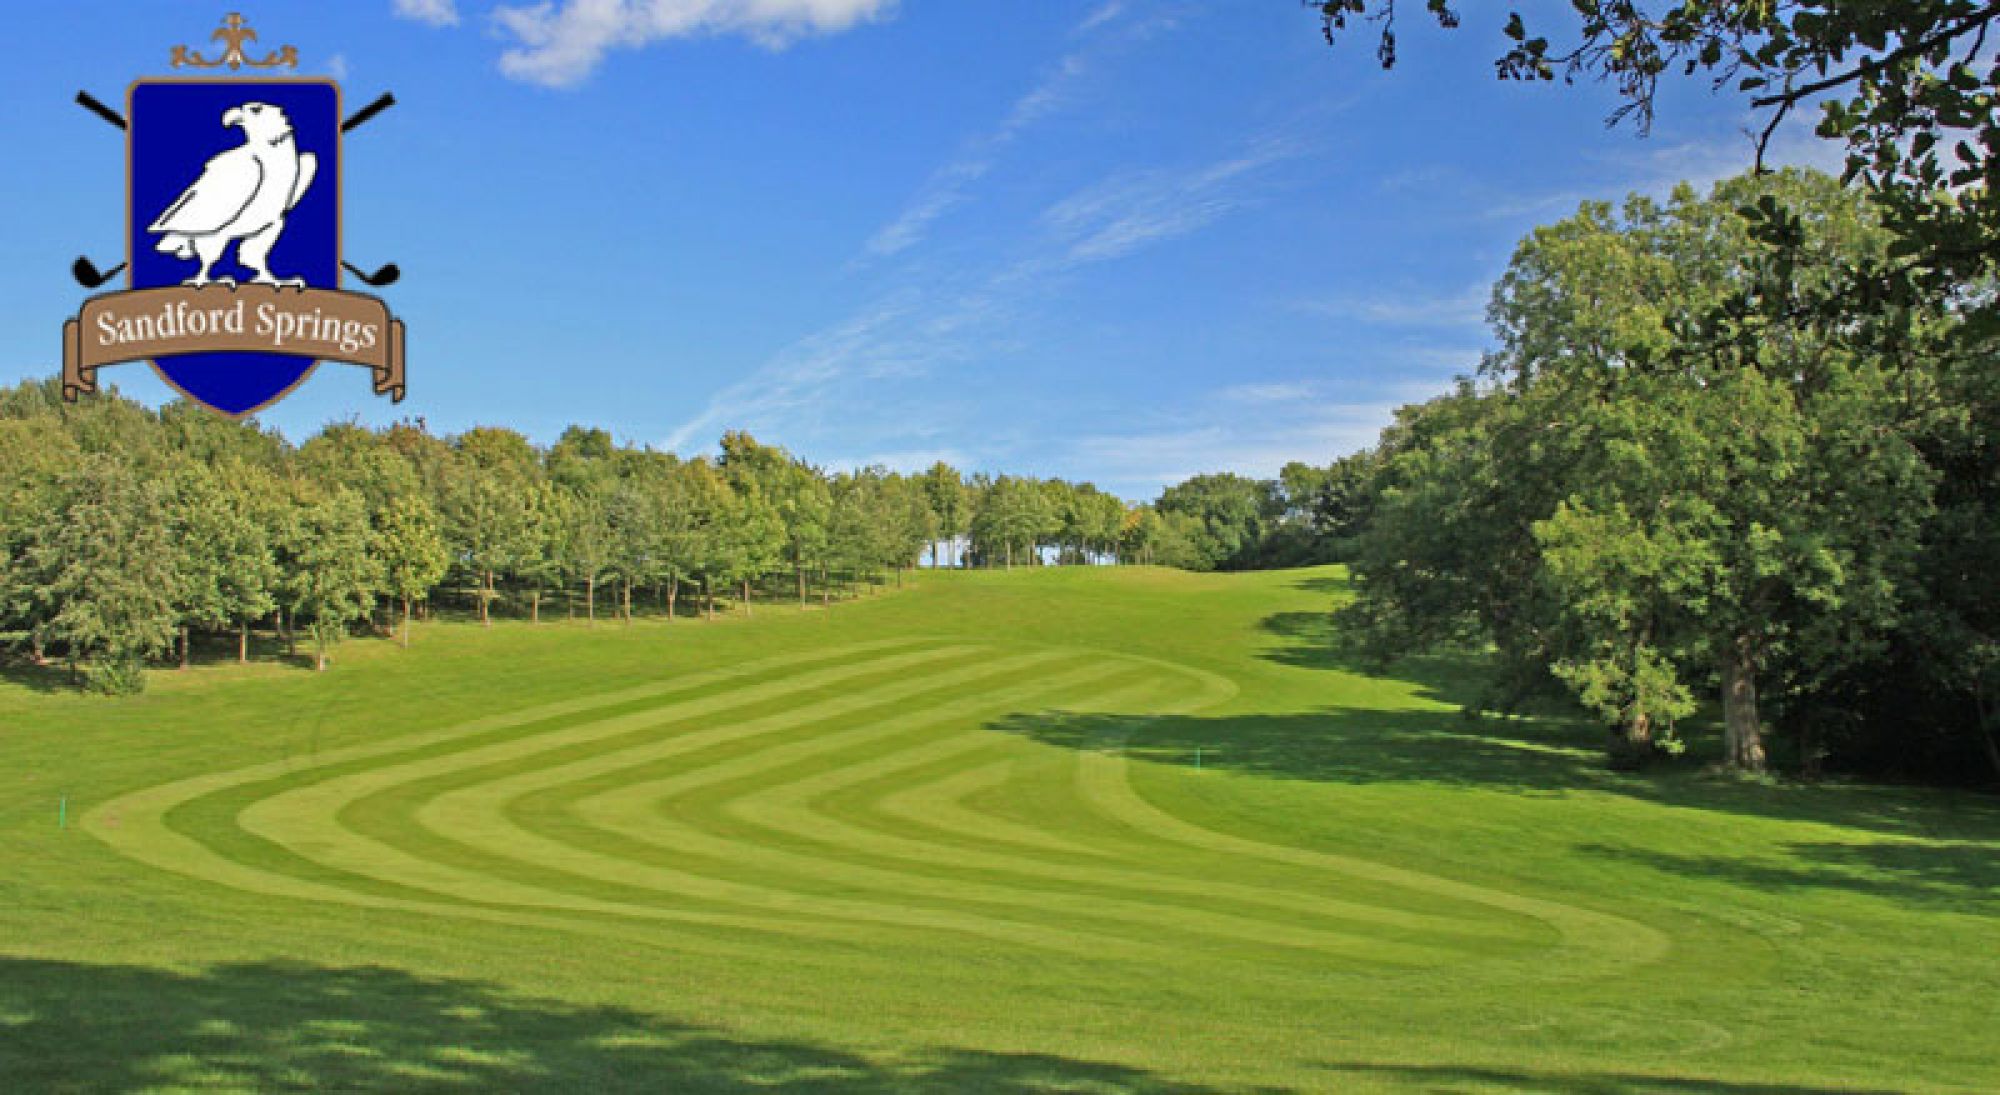 The Sandford Springs Golf Club's beautiful golf course within dazzling Hampshire.